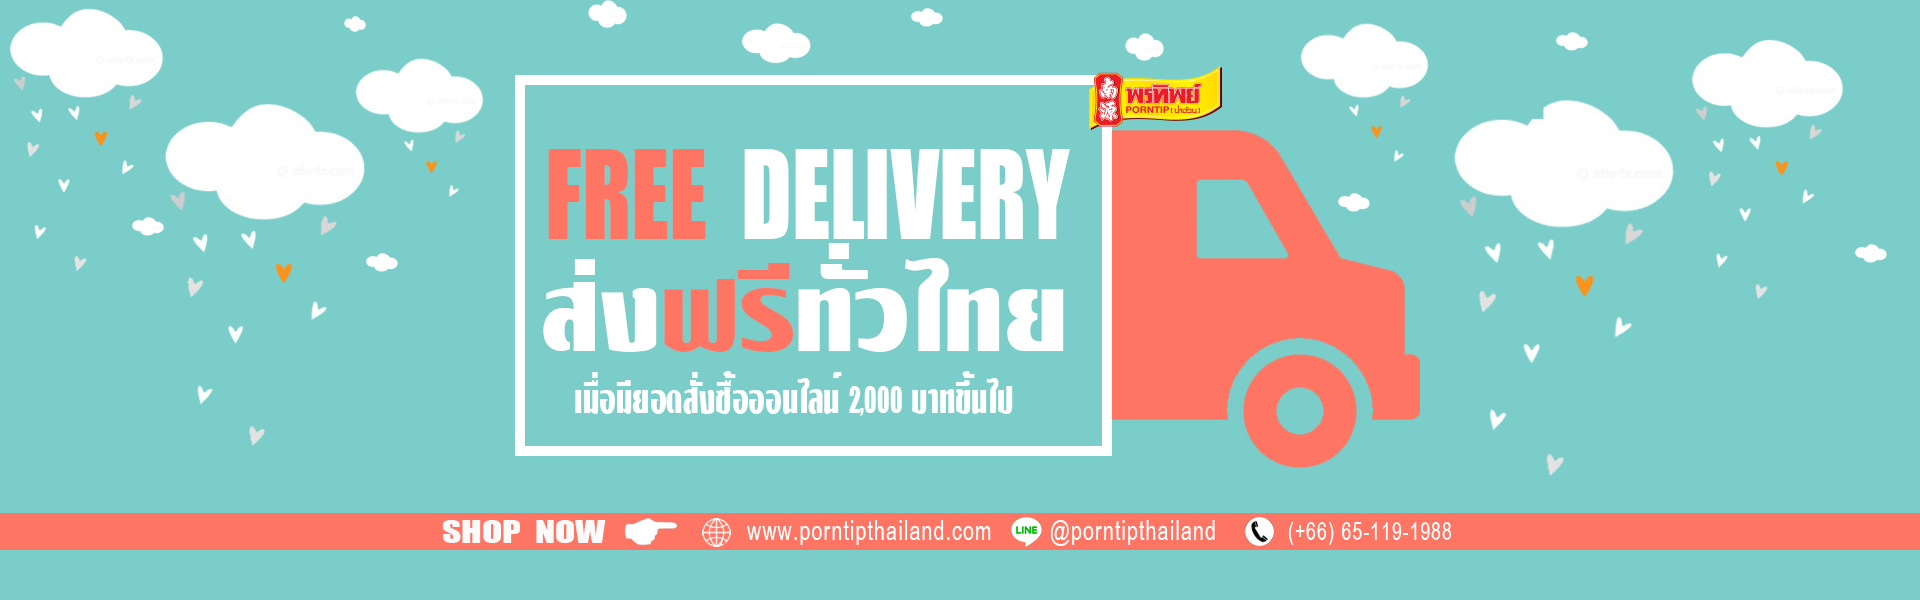 Free shipping if order more than 2,000 baht!